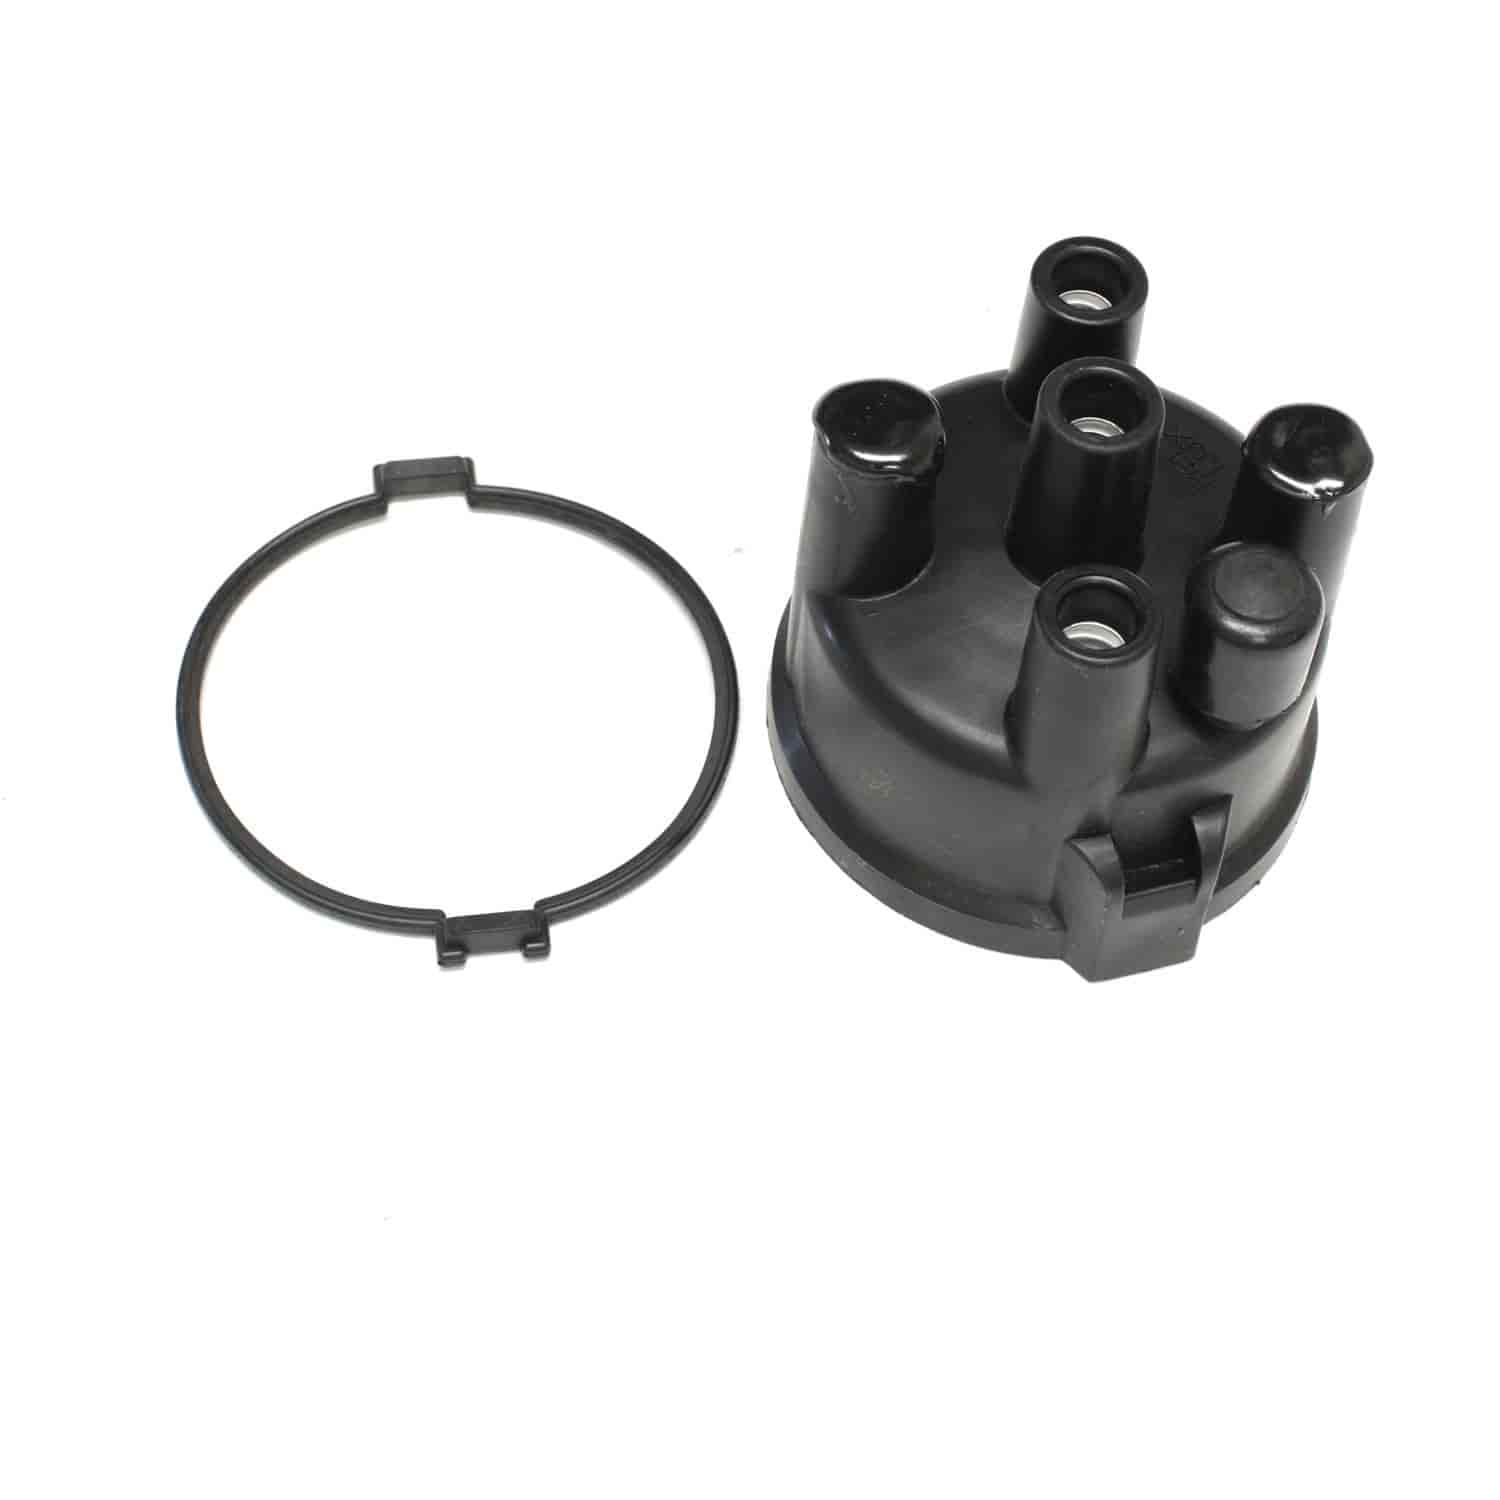 PerTronix 022-1204 Cap Kit for D21-13A for PerTronix